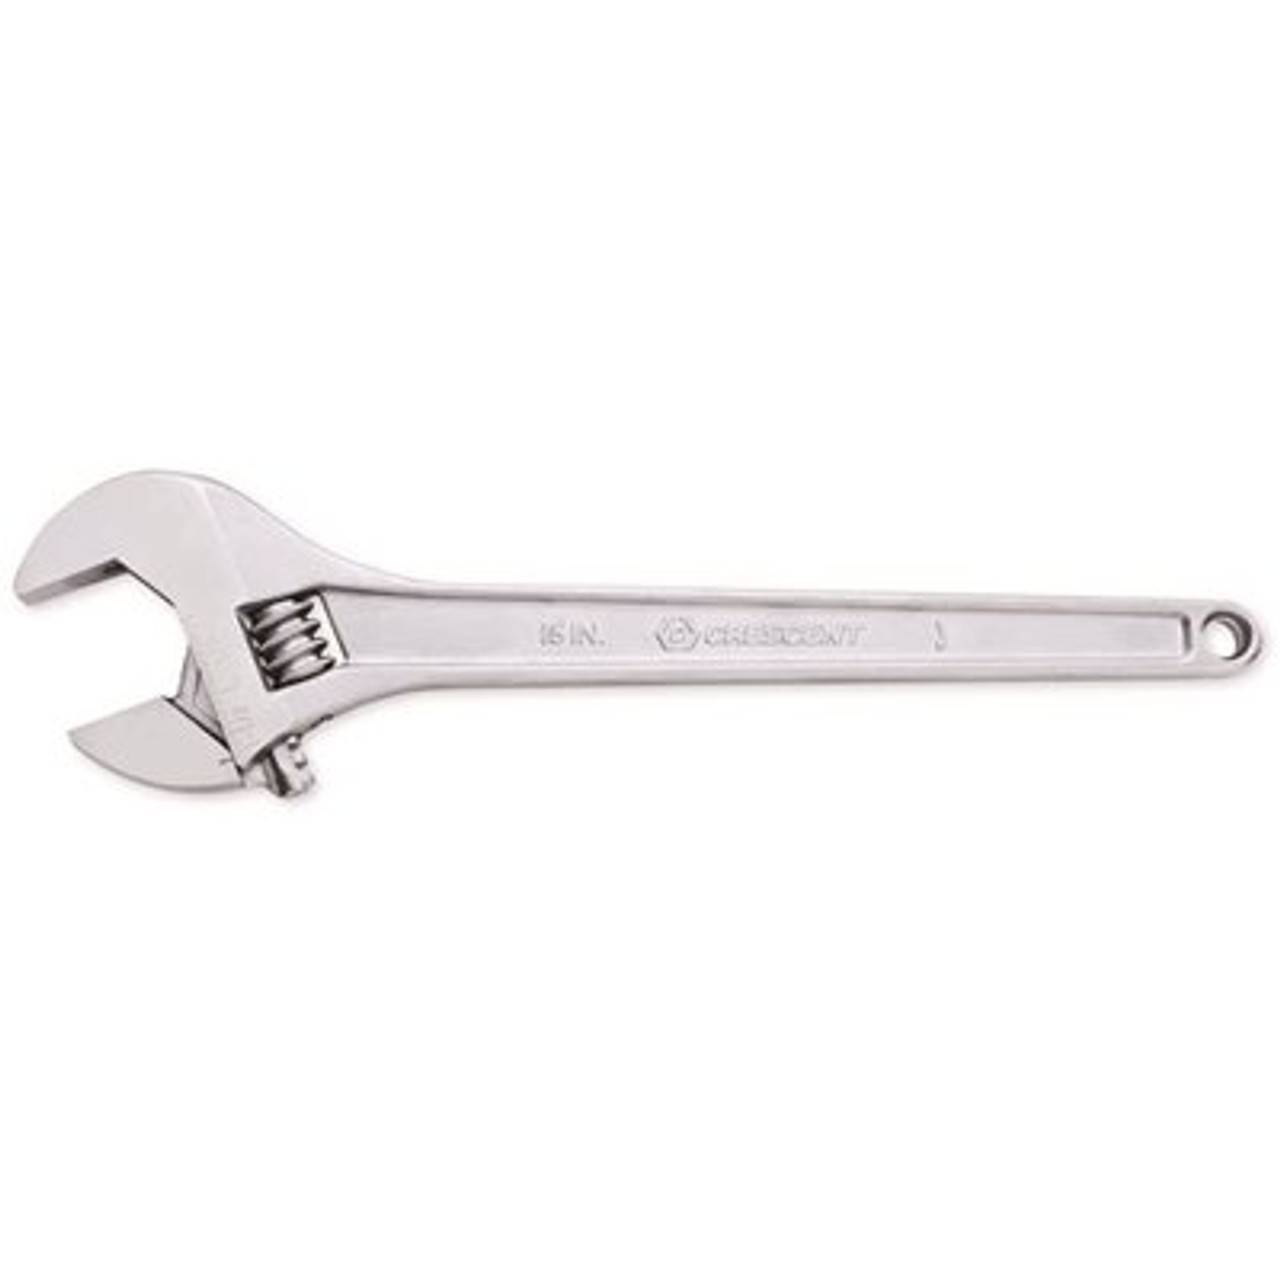 Crescent 15 in. Adjustable Wrench